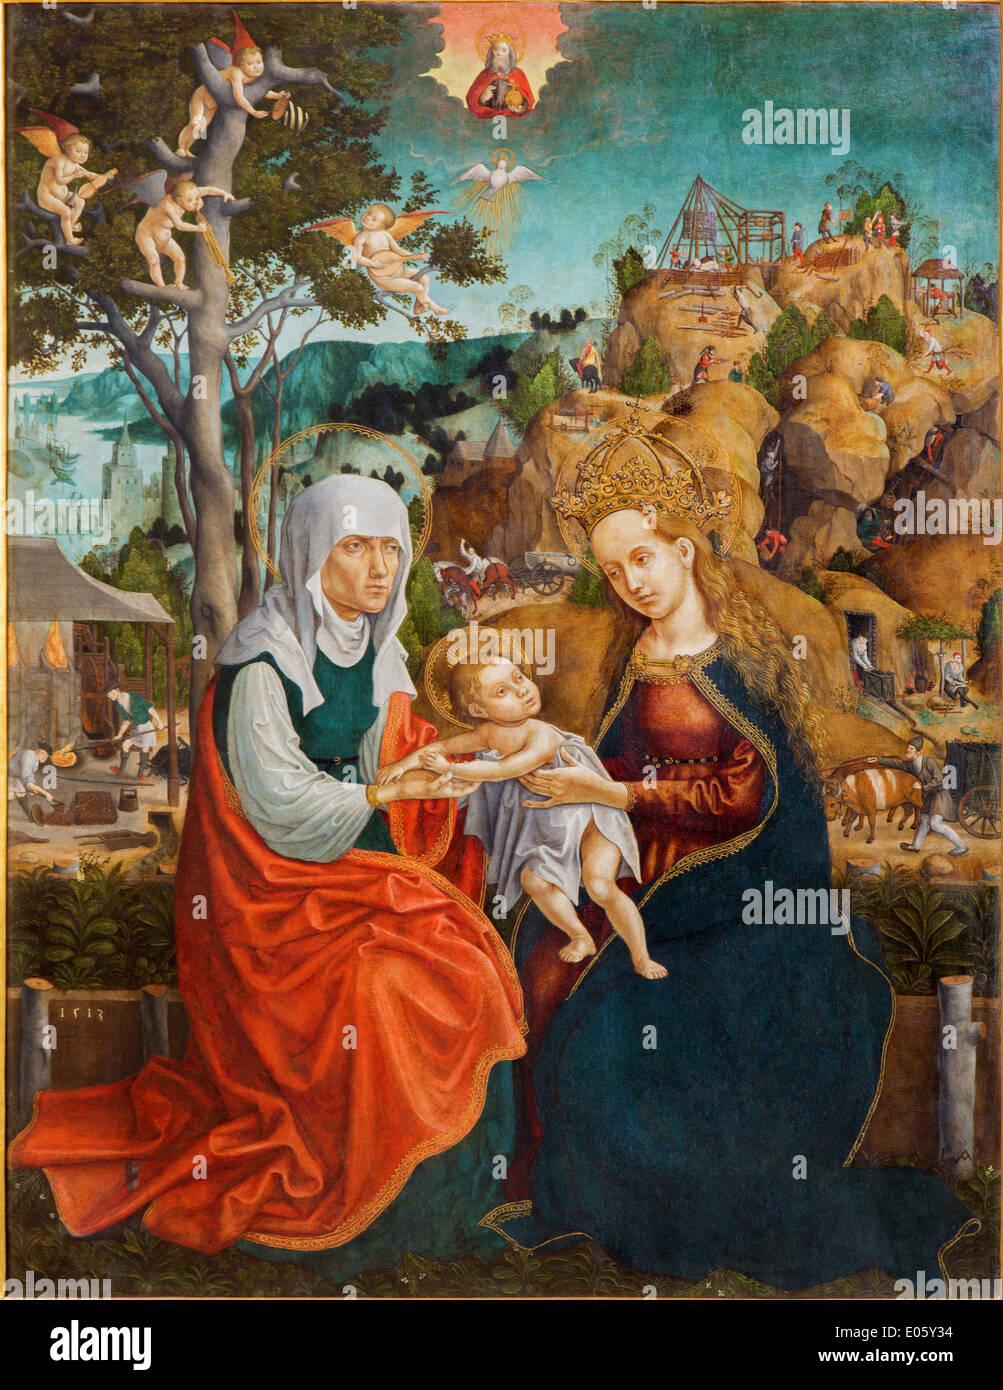 Roznava - Saint Ann, Virgin Mary and little Jesus. Paint from year 1513 by unknown painter in the cathedral. Stock Photo